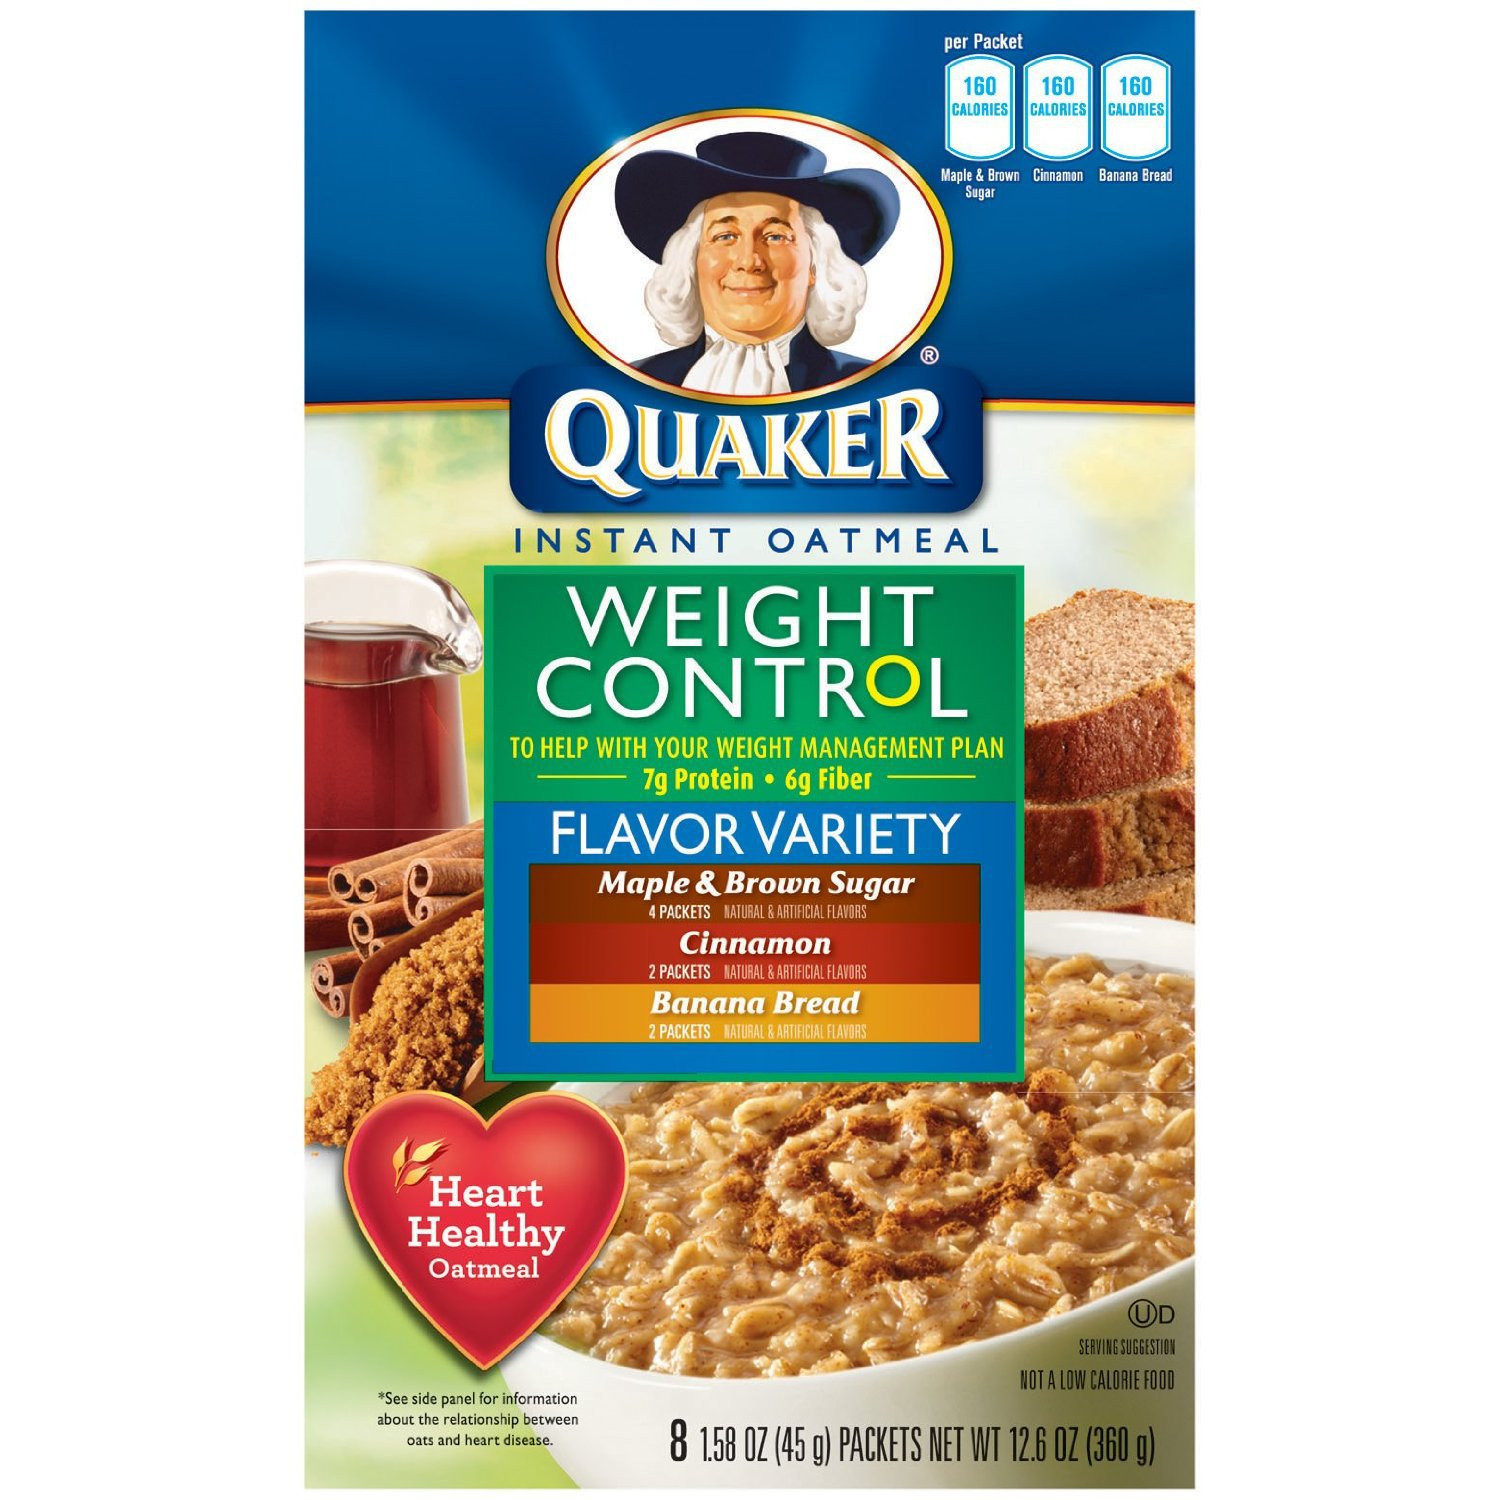 Quaker Oats Weight Control New Quaker Instant Oatmeal Weight Control Flavor Variety Pack